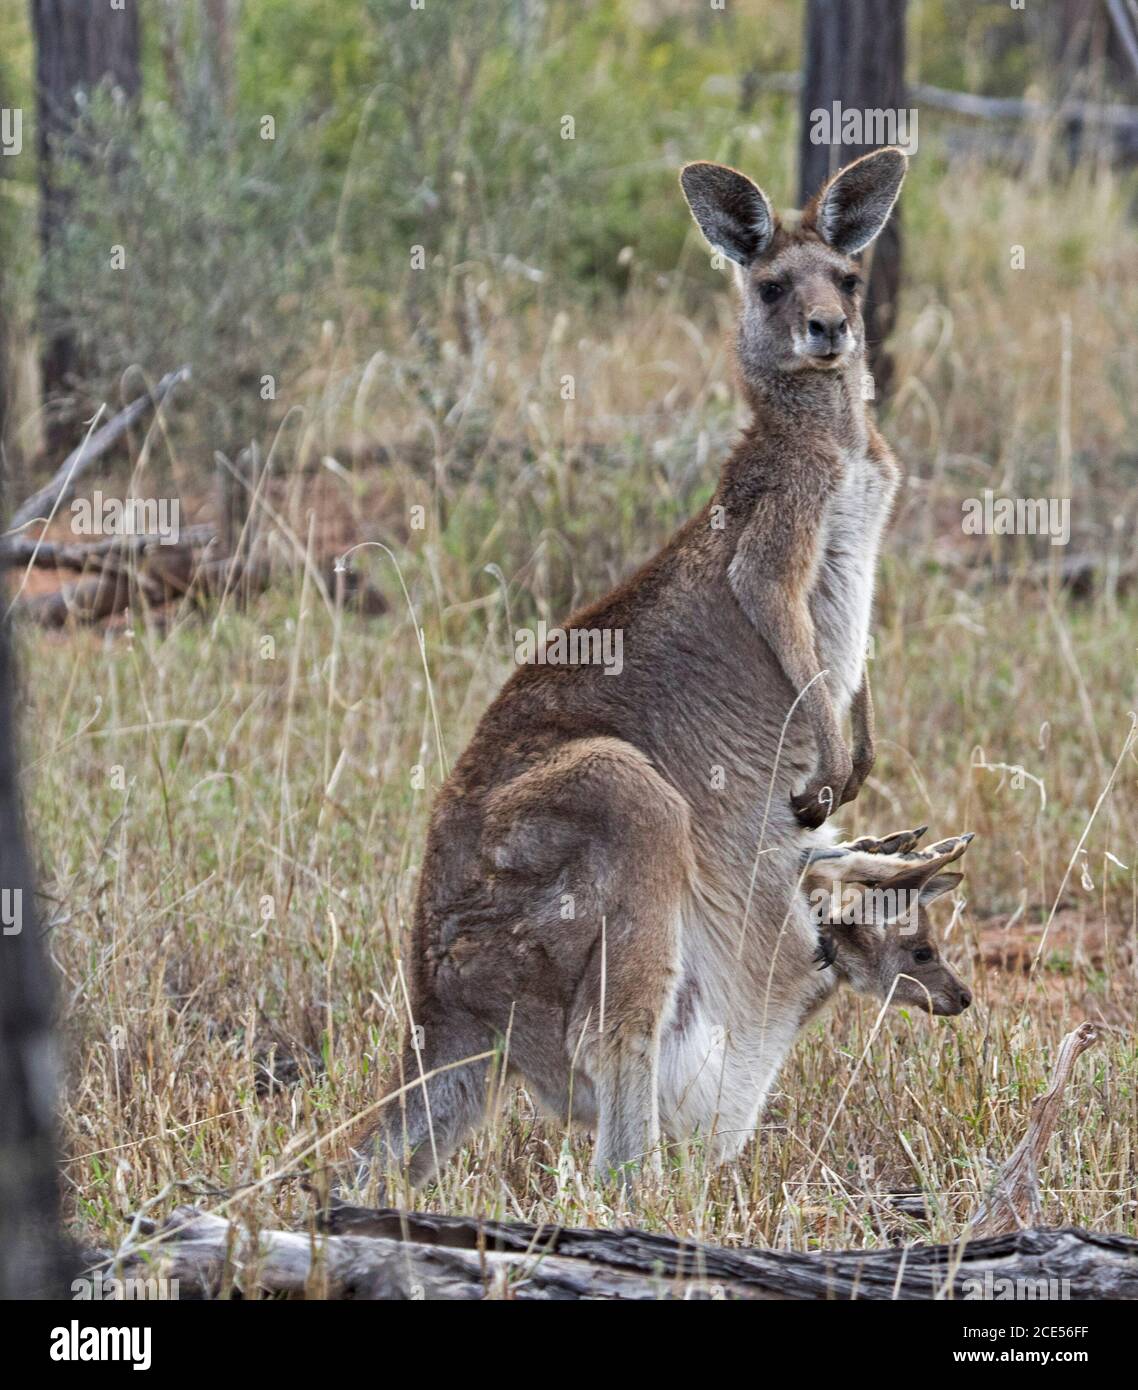 Beautiful female Australian Eastern Grey kangaroo  in the wild with joey peering from her pouch, alert and staring at camera, in bushland in Australia Stock Photo